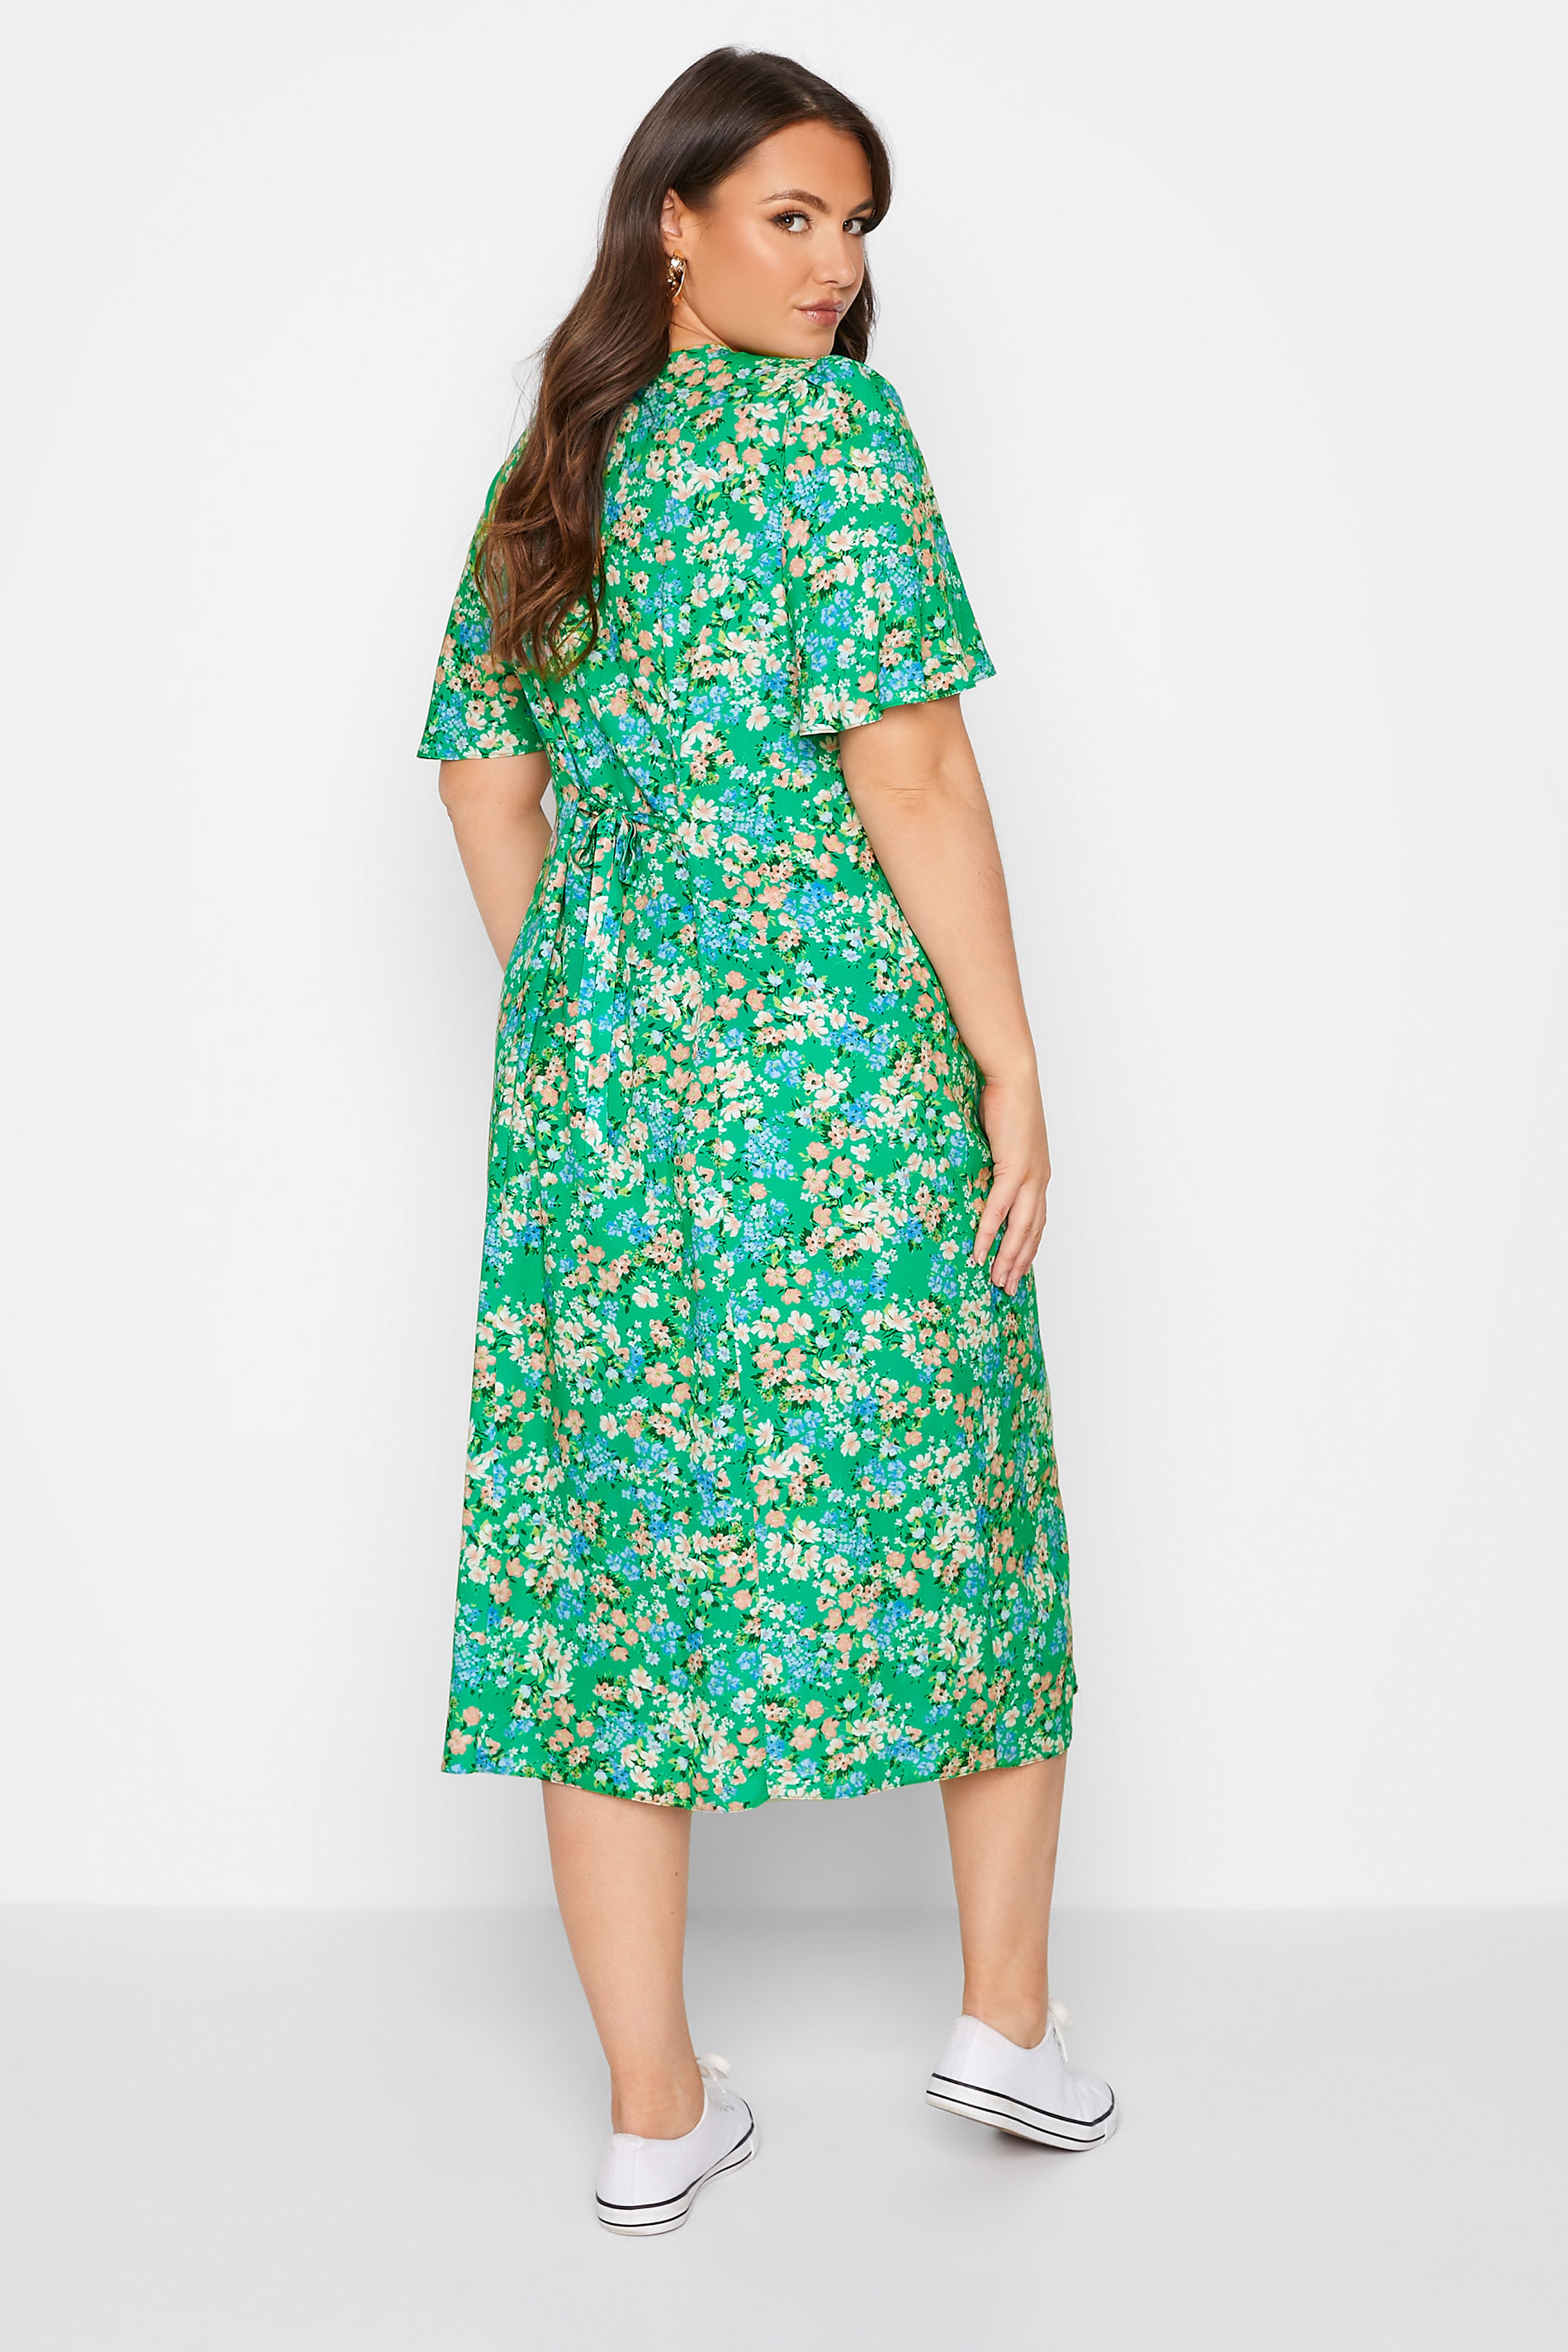 YOURS LONDON Plus Size Green Floral Print Button Through Tea Dress | Yours Clothing  3